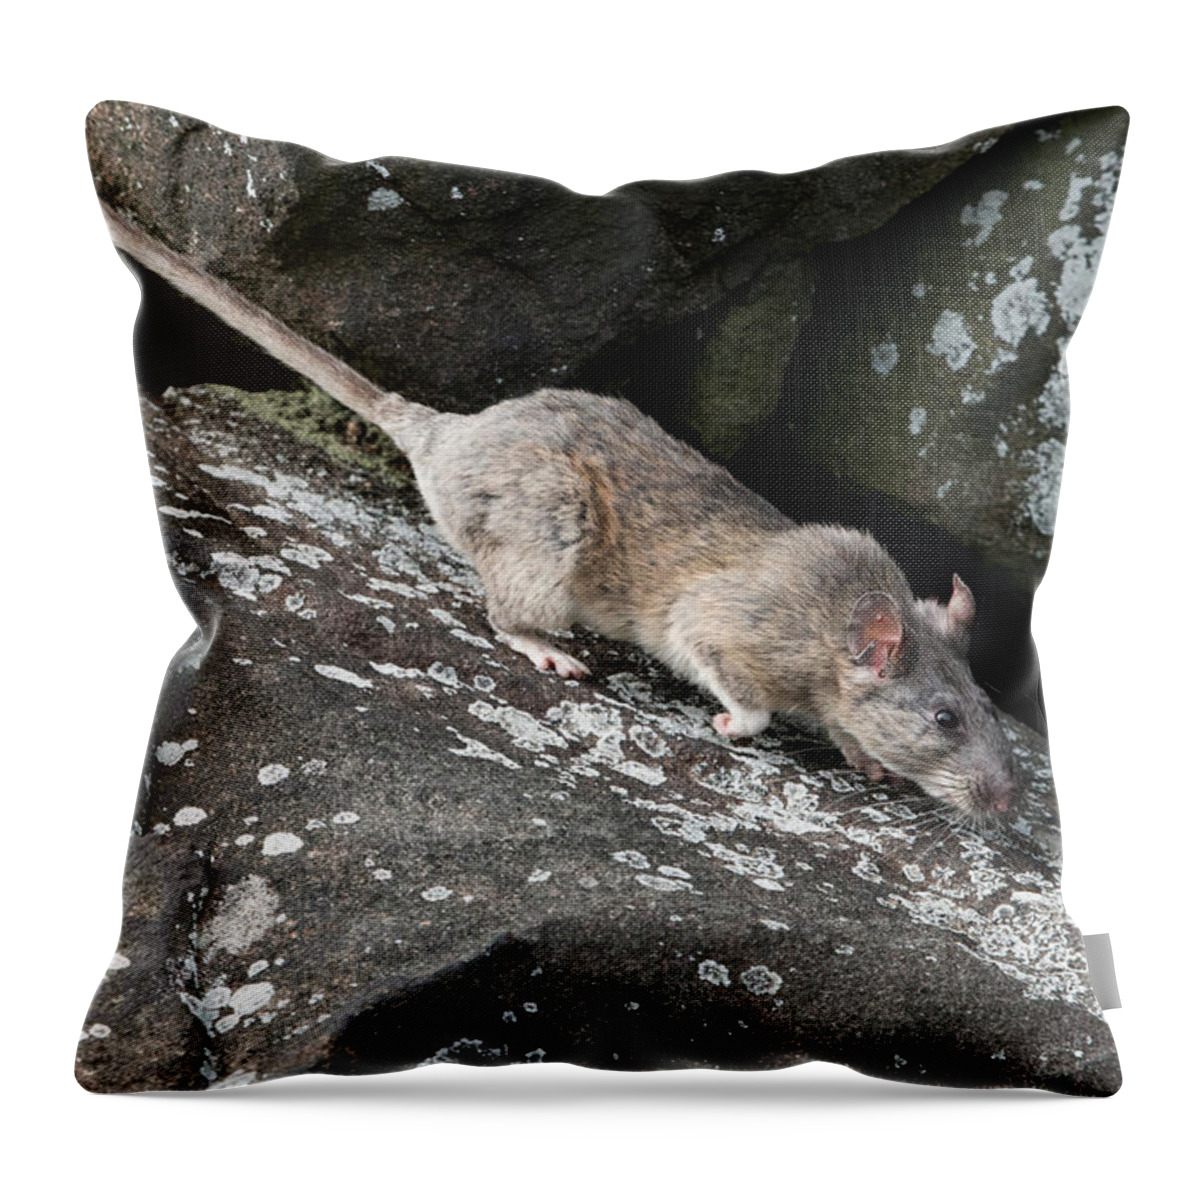 Allegheny Woodrat Throw Pillow featuring the photograph Allegheny Woodrat Neotoma Magister by David Kenny